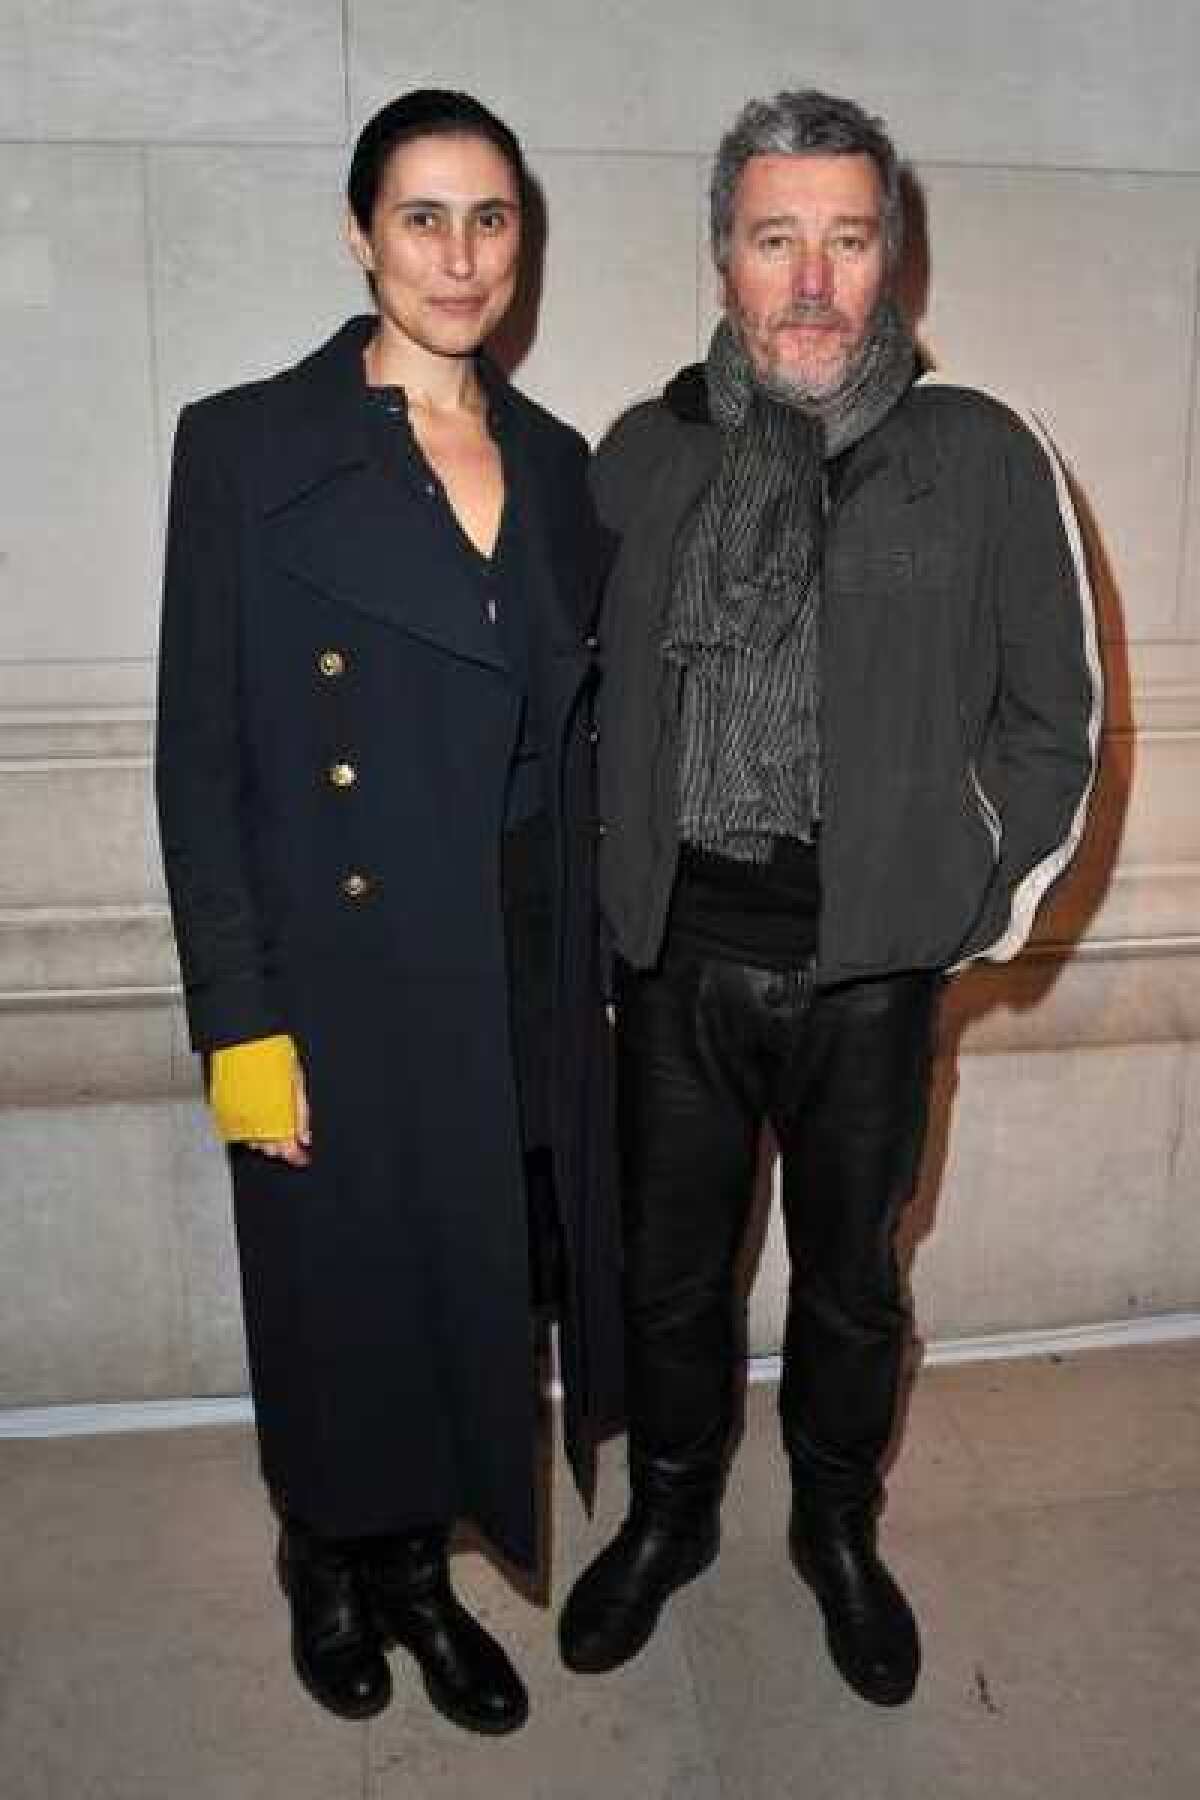 Jasmine Abdellatif and Philippe Starck attend the Louis Vuitton - Marc Jacobs: The Exhibition photo call as part of Paris Fashion Week at the Musee des Arts Decoratifs last month in Paris.